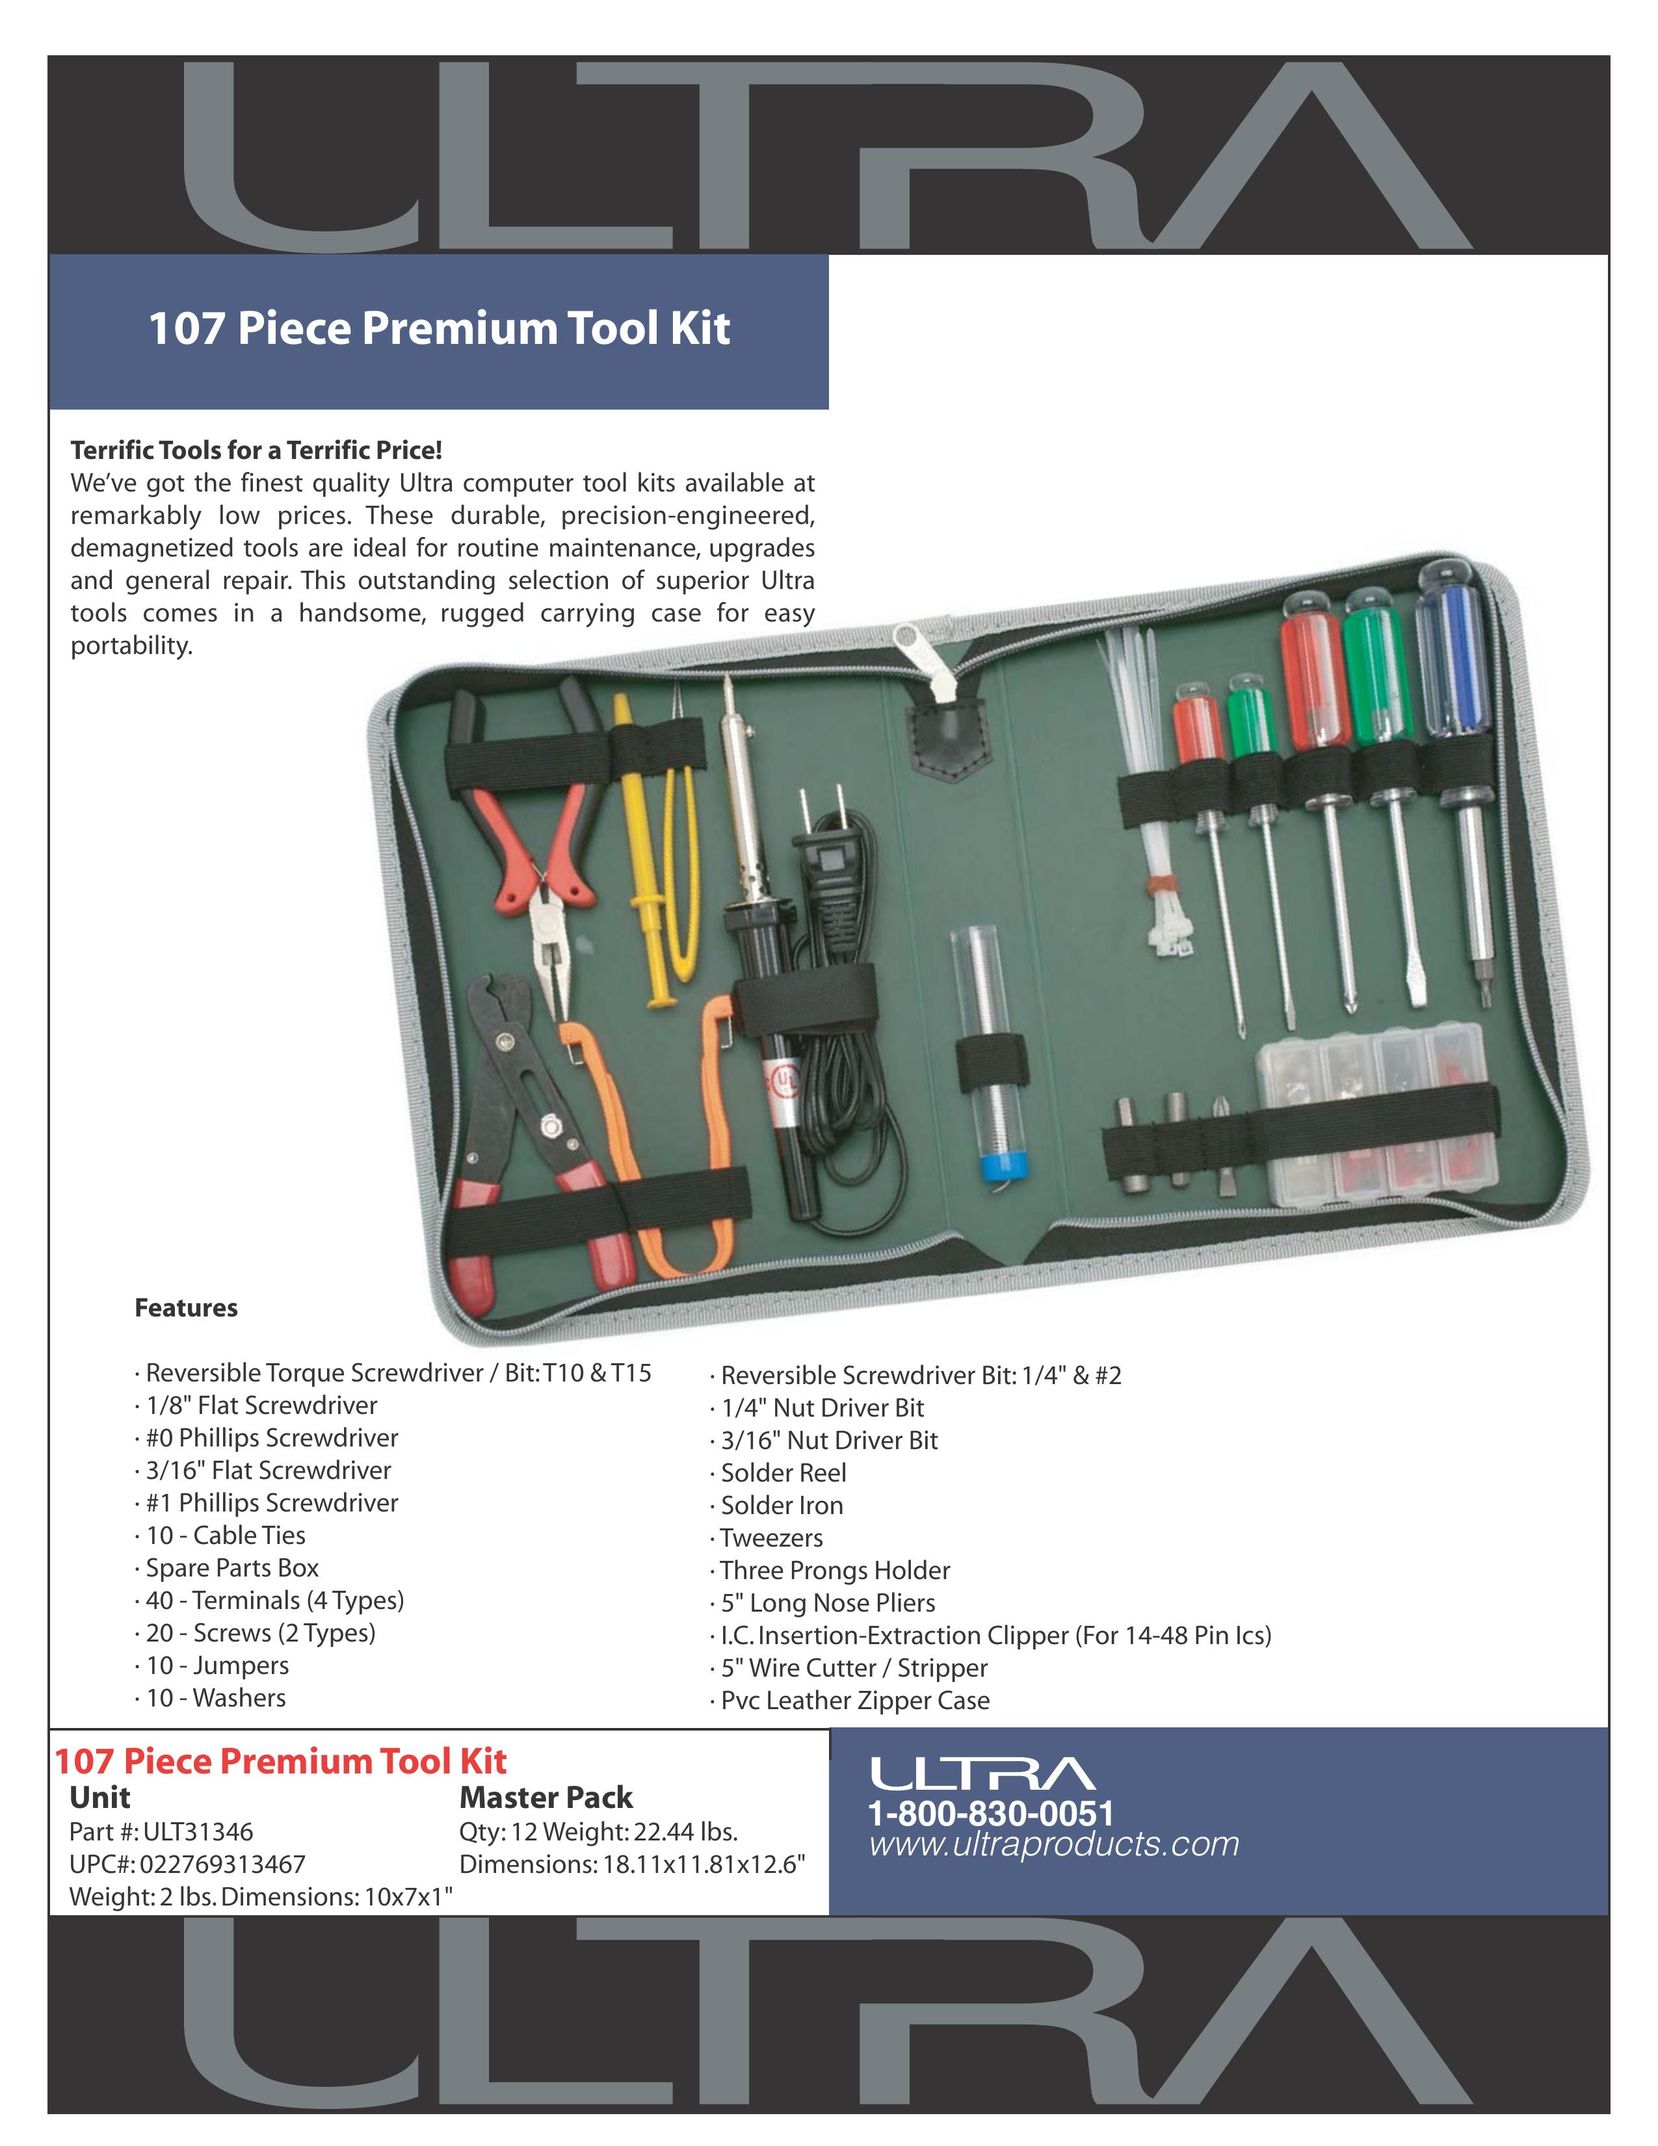 Ultra Products ULT31346 Tool Storage User Manual